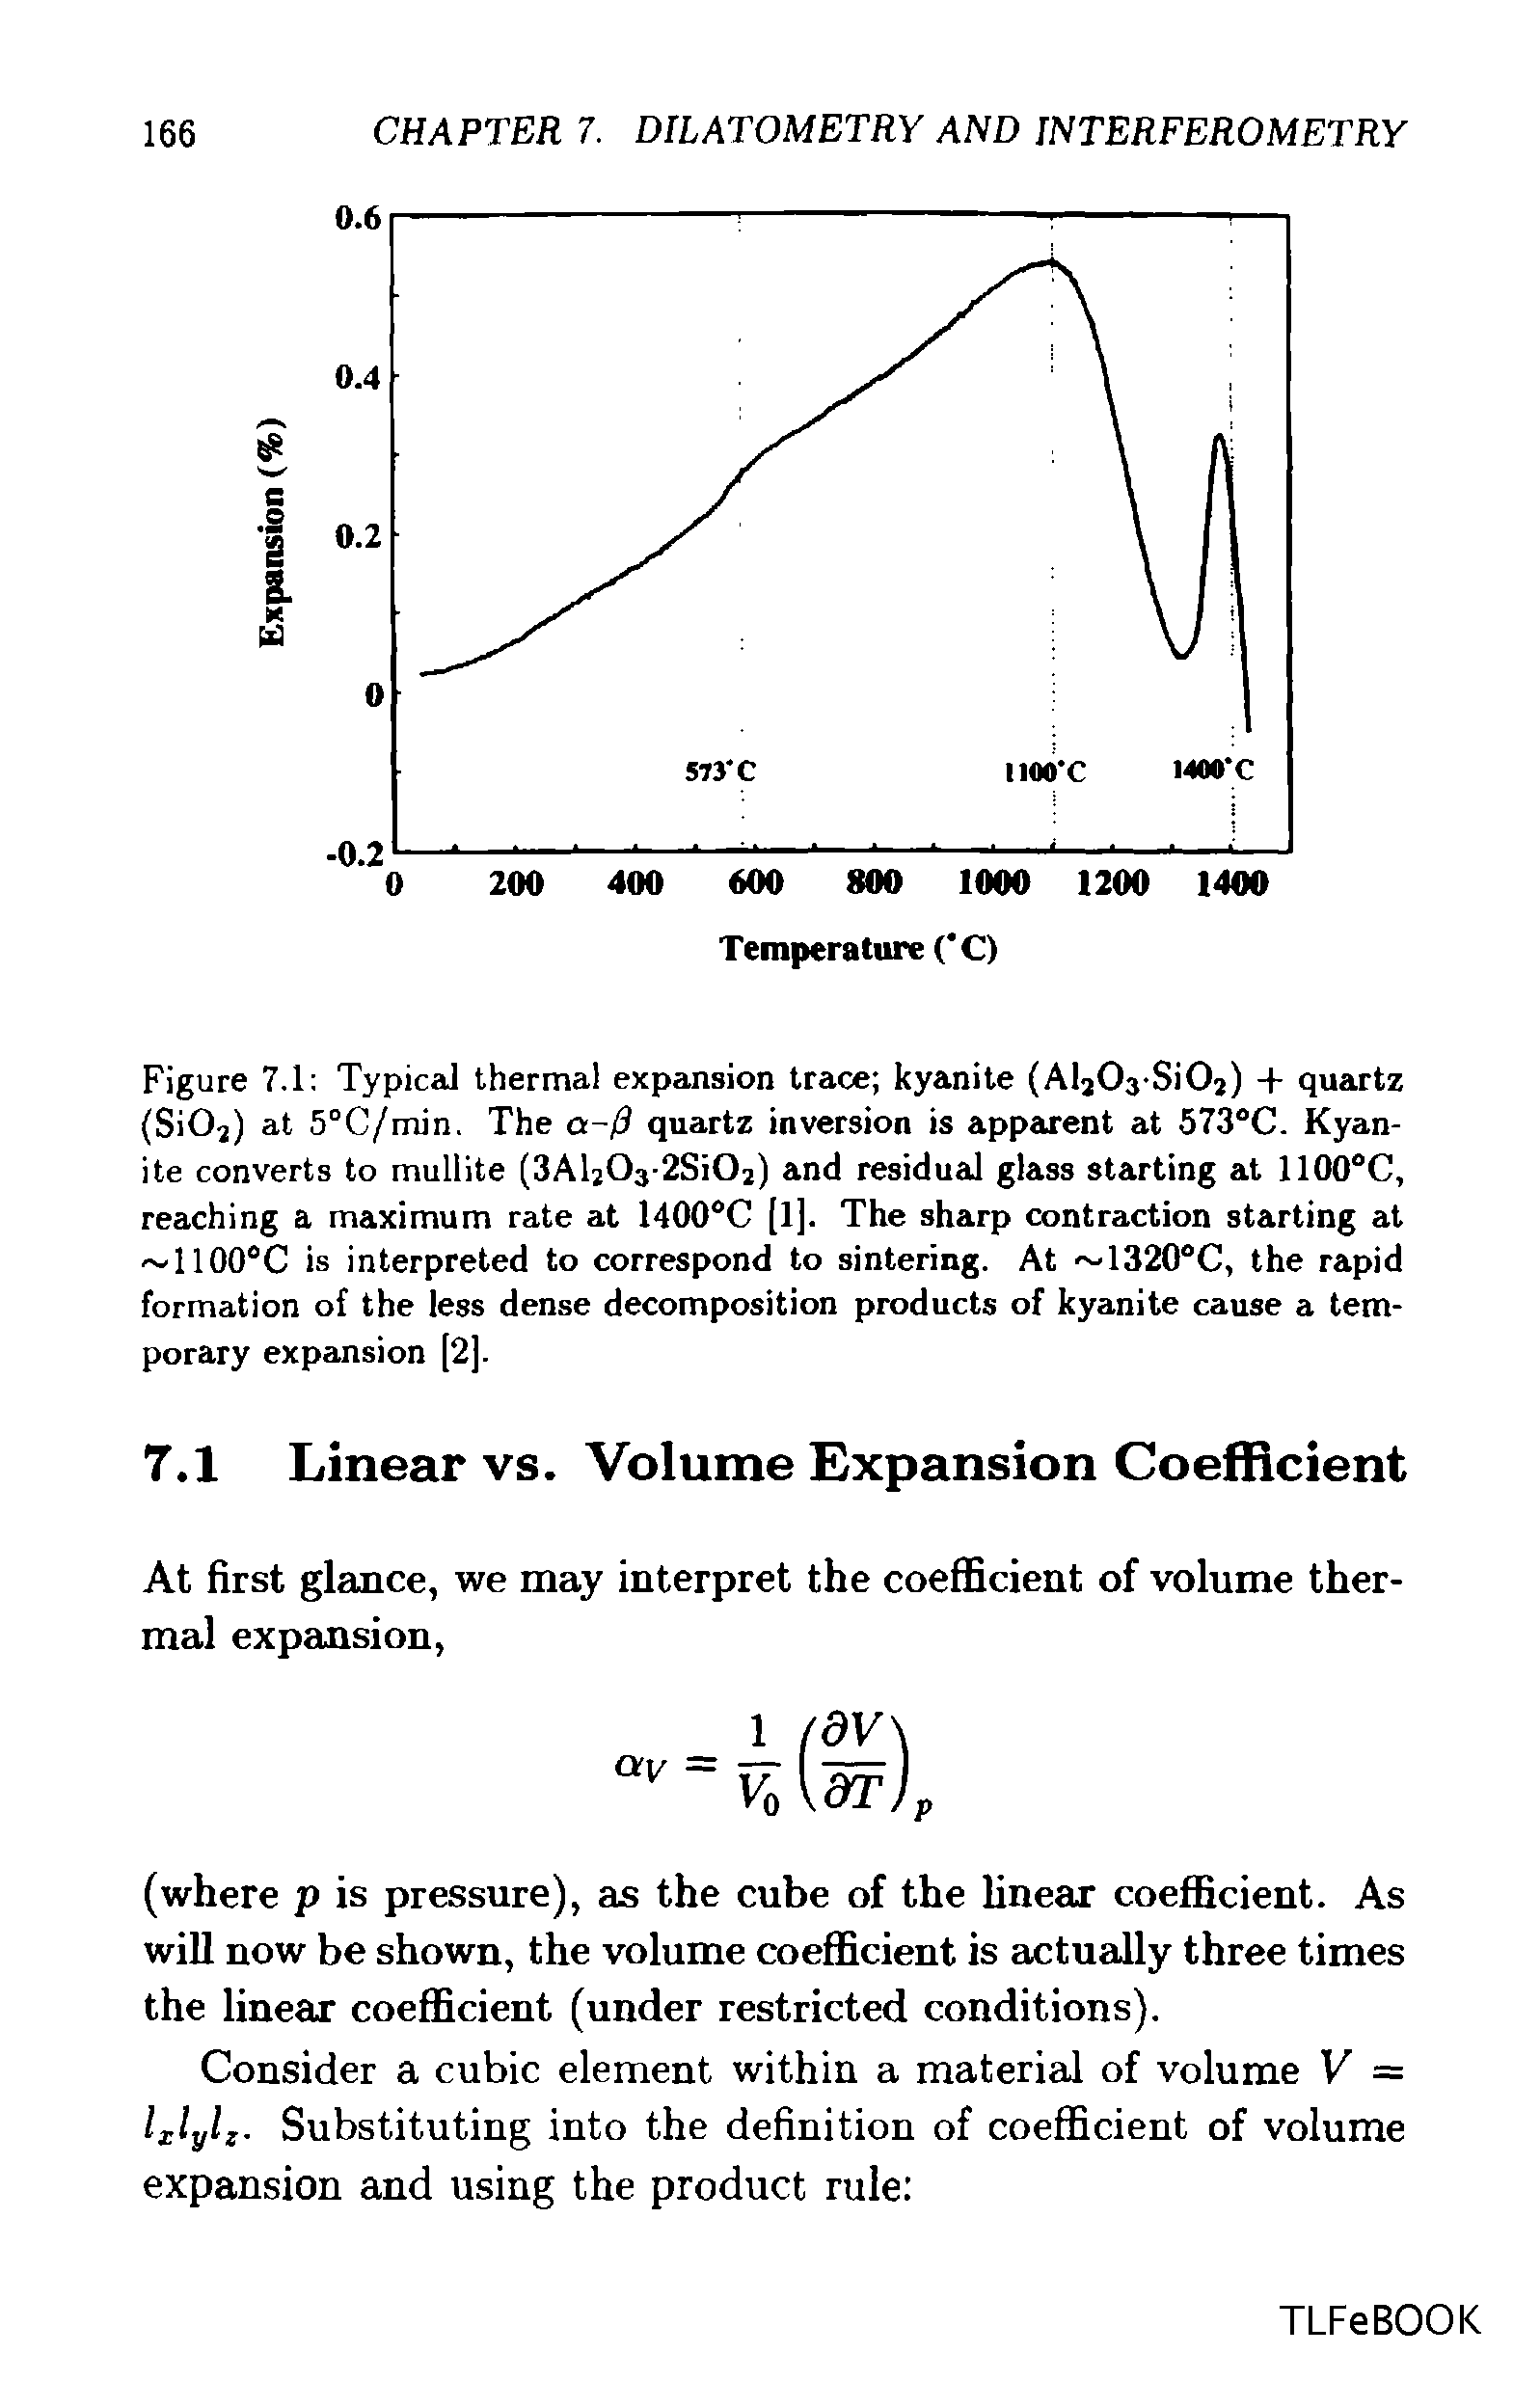 Figure 7.1 Typical thermal expansion trace kyanite (AljCVSiOj) + quartz (Si02) at 5°C/min. The a-0 quartz inversion is apparent at 573°C. Kyanite converts to mullite (3Alj03-2Si02) and residual glass starting at 1100°C, reaching a maximum rate at 1400°C [1]. The sharp contraction starting at 1100°C is interpreted to correspond to sintering. At 1320°C, the rapid formation of the less dense decomposition products of kyanite cause a temporary expansion [2].